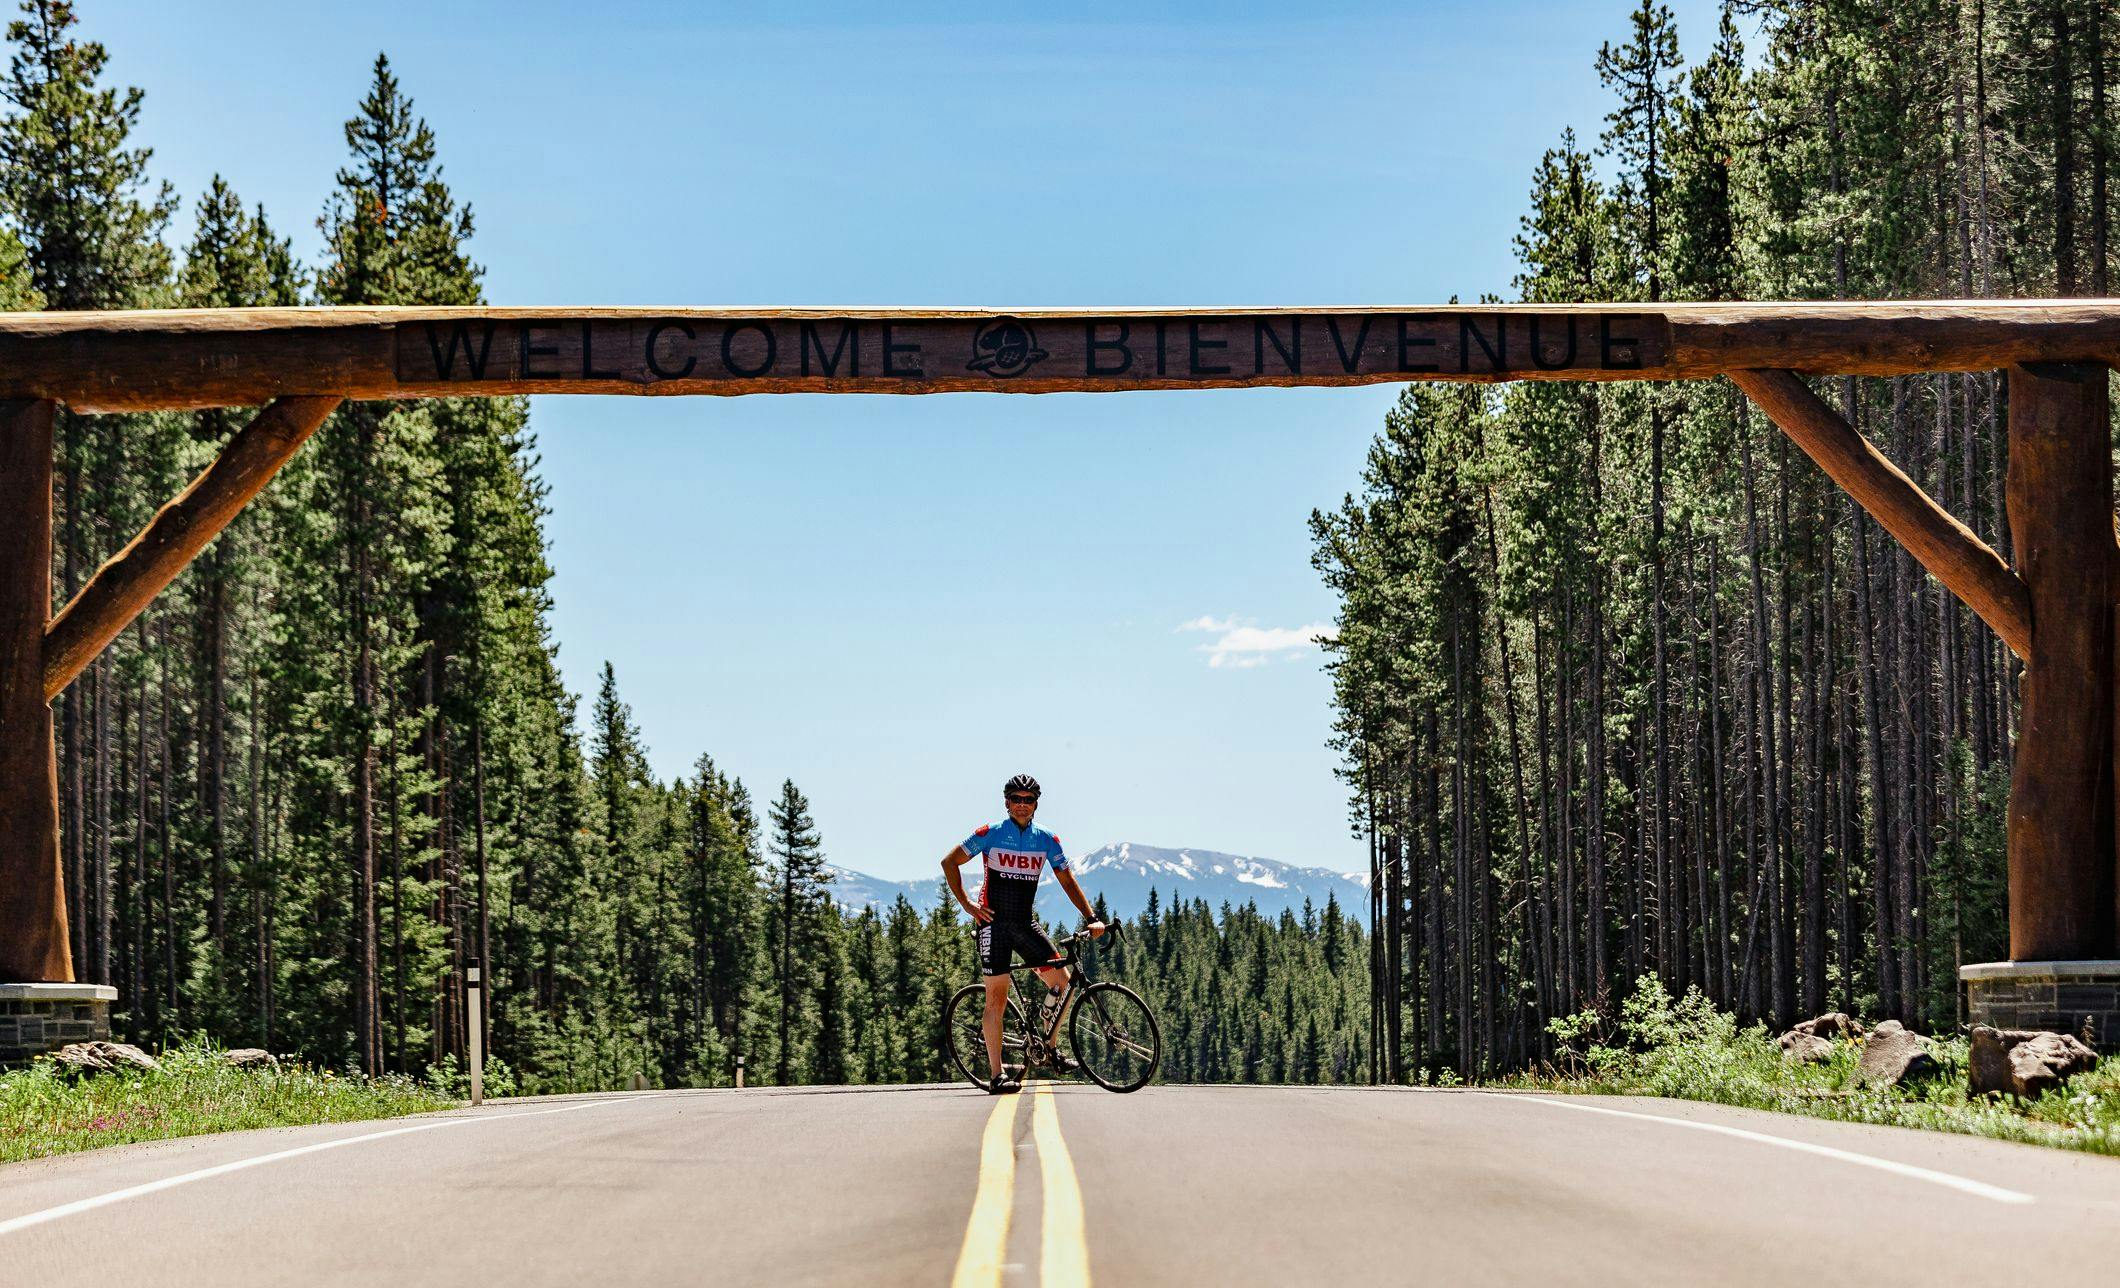 Cyclists mounted on bike underneath the Welcome sign on the Bow Valley Parkway